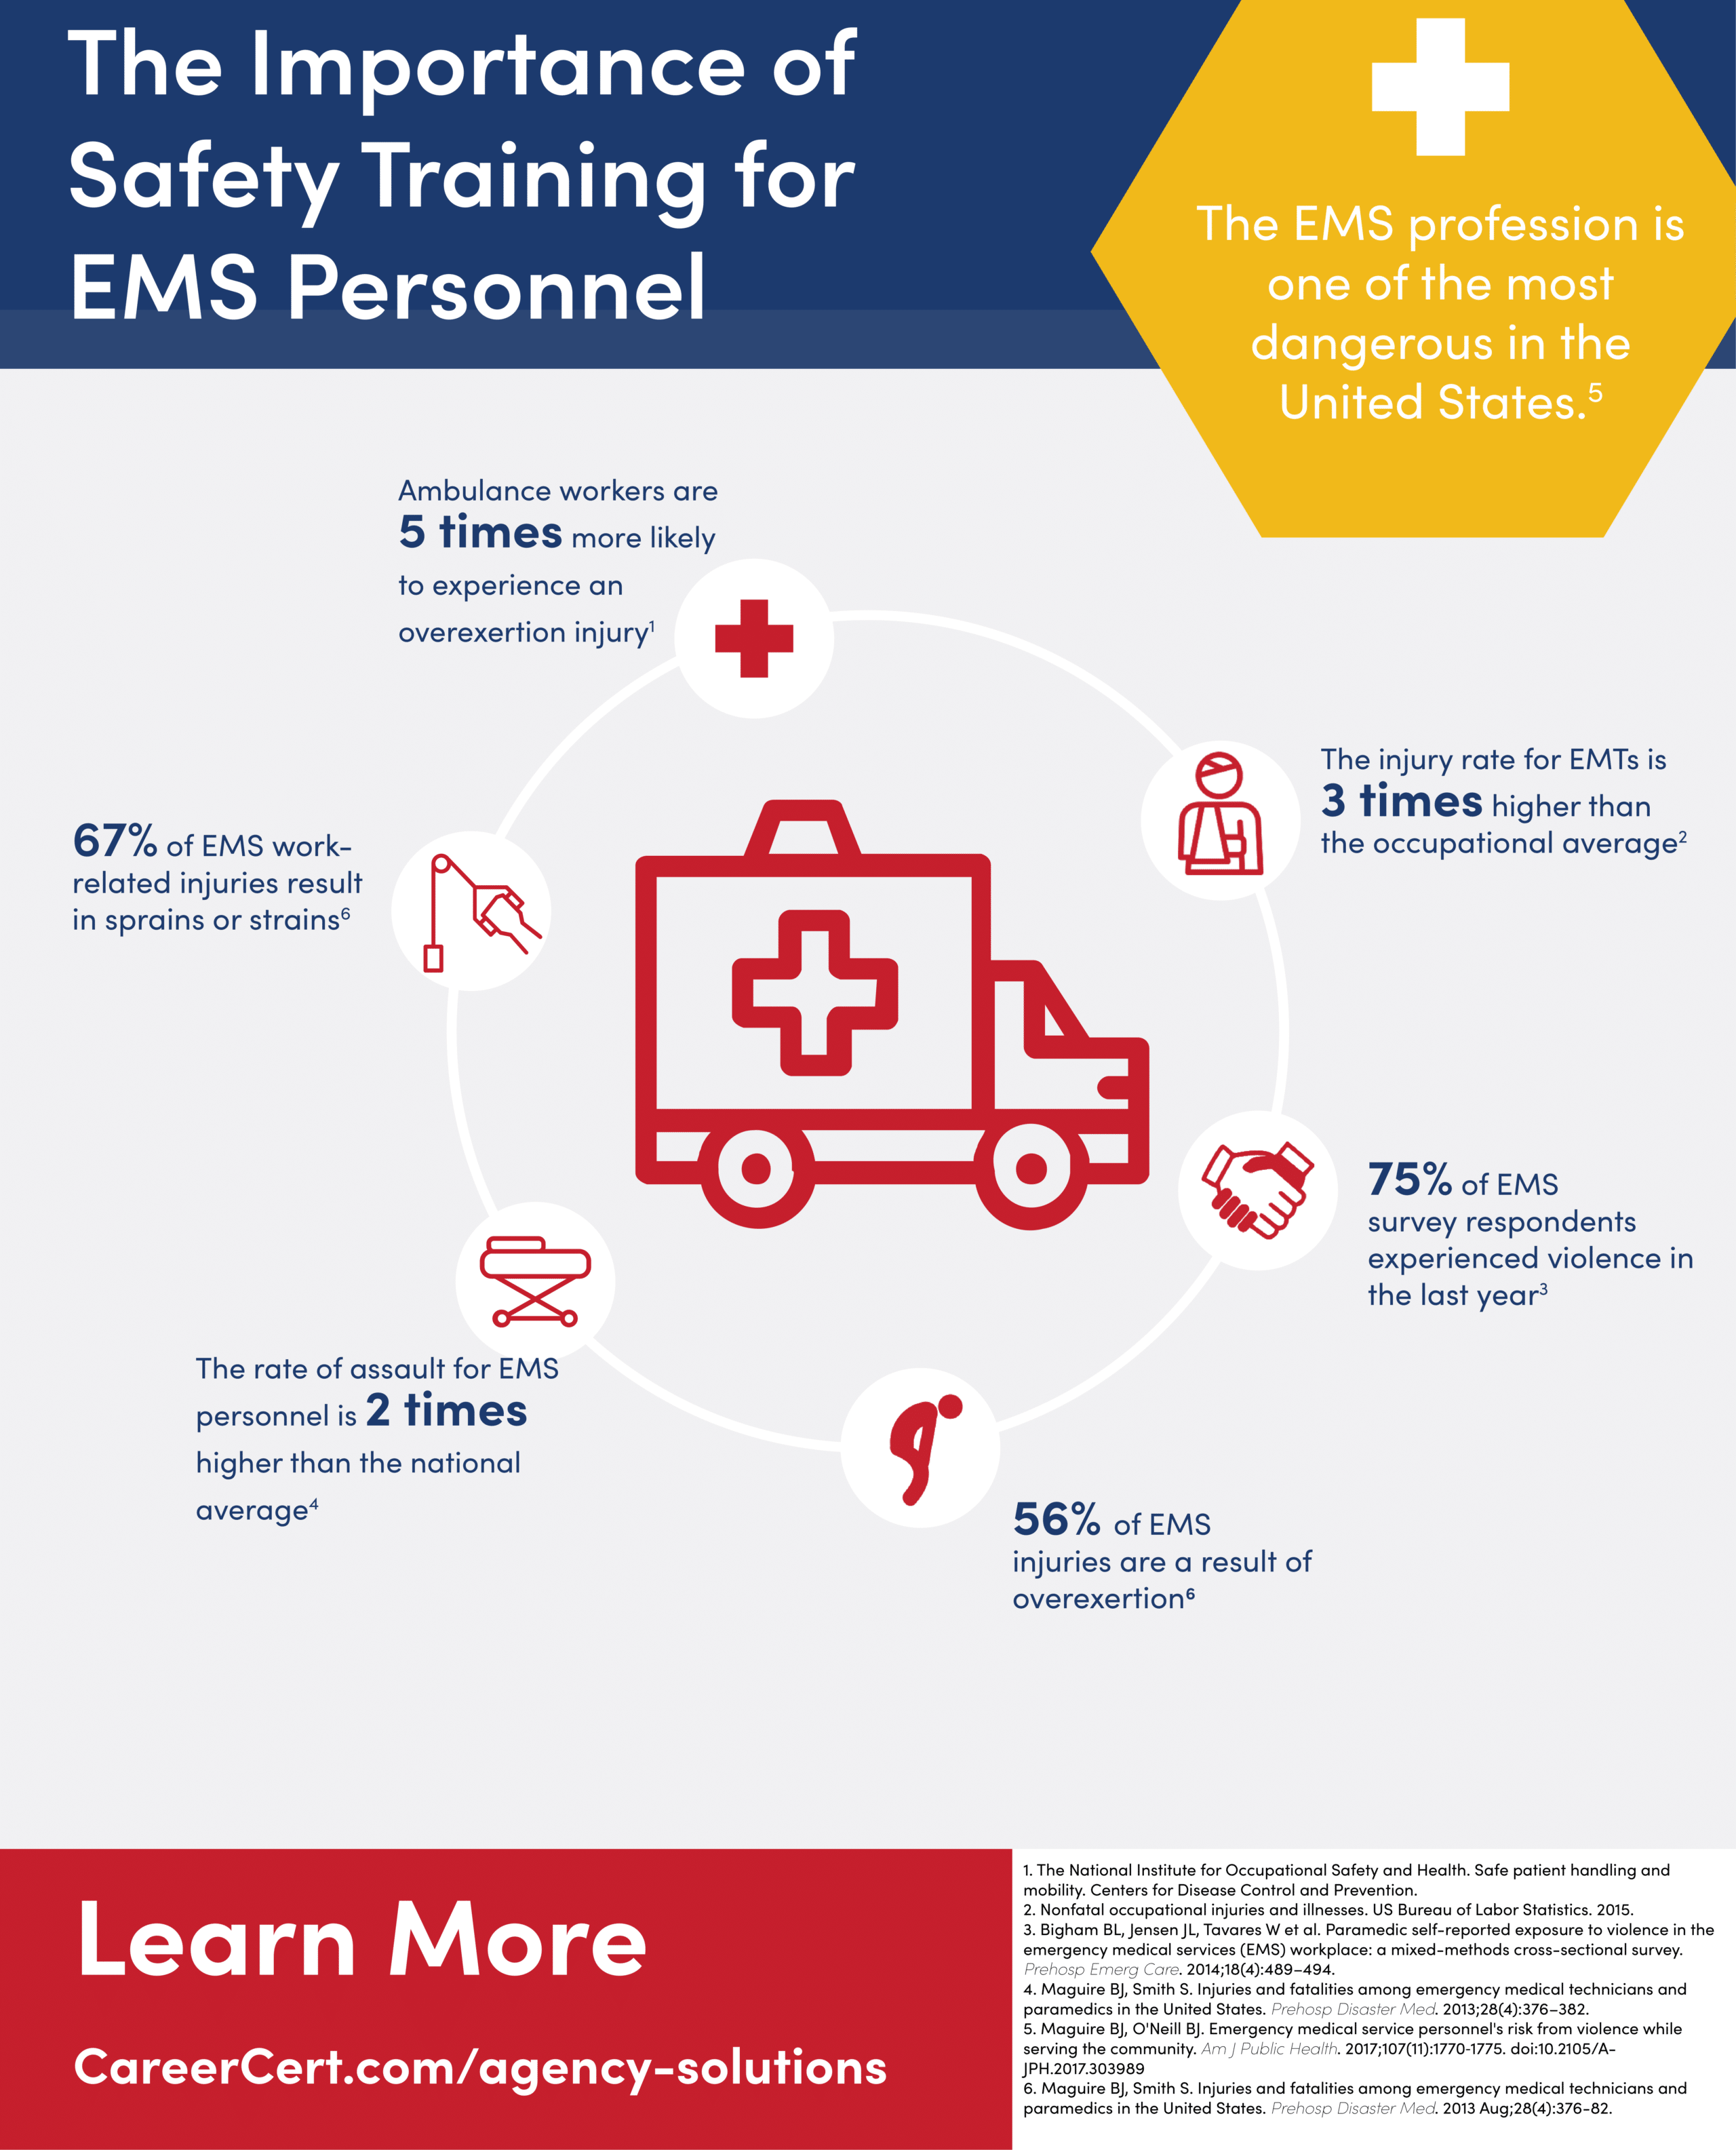 Statistics that demonstrate EMS personnel have a higher risk of injury and assault